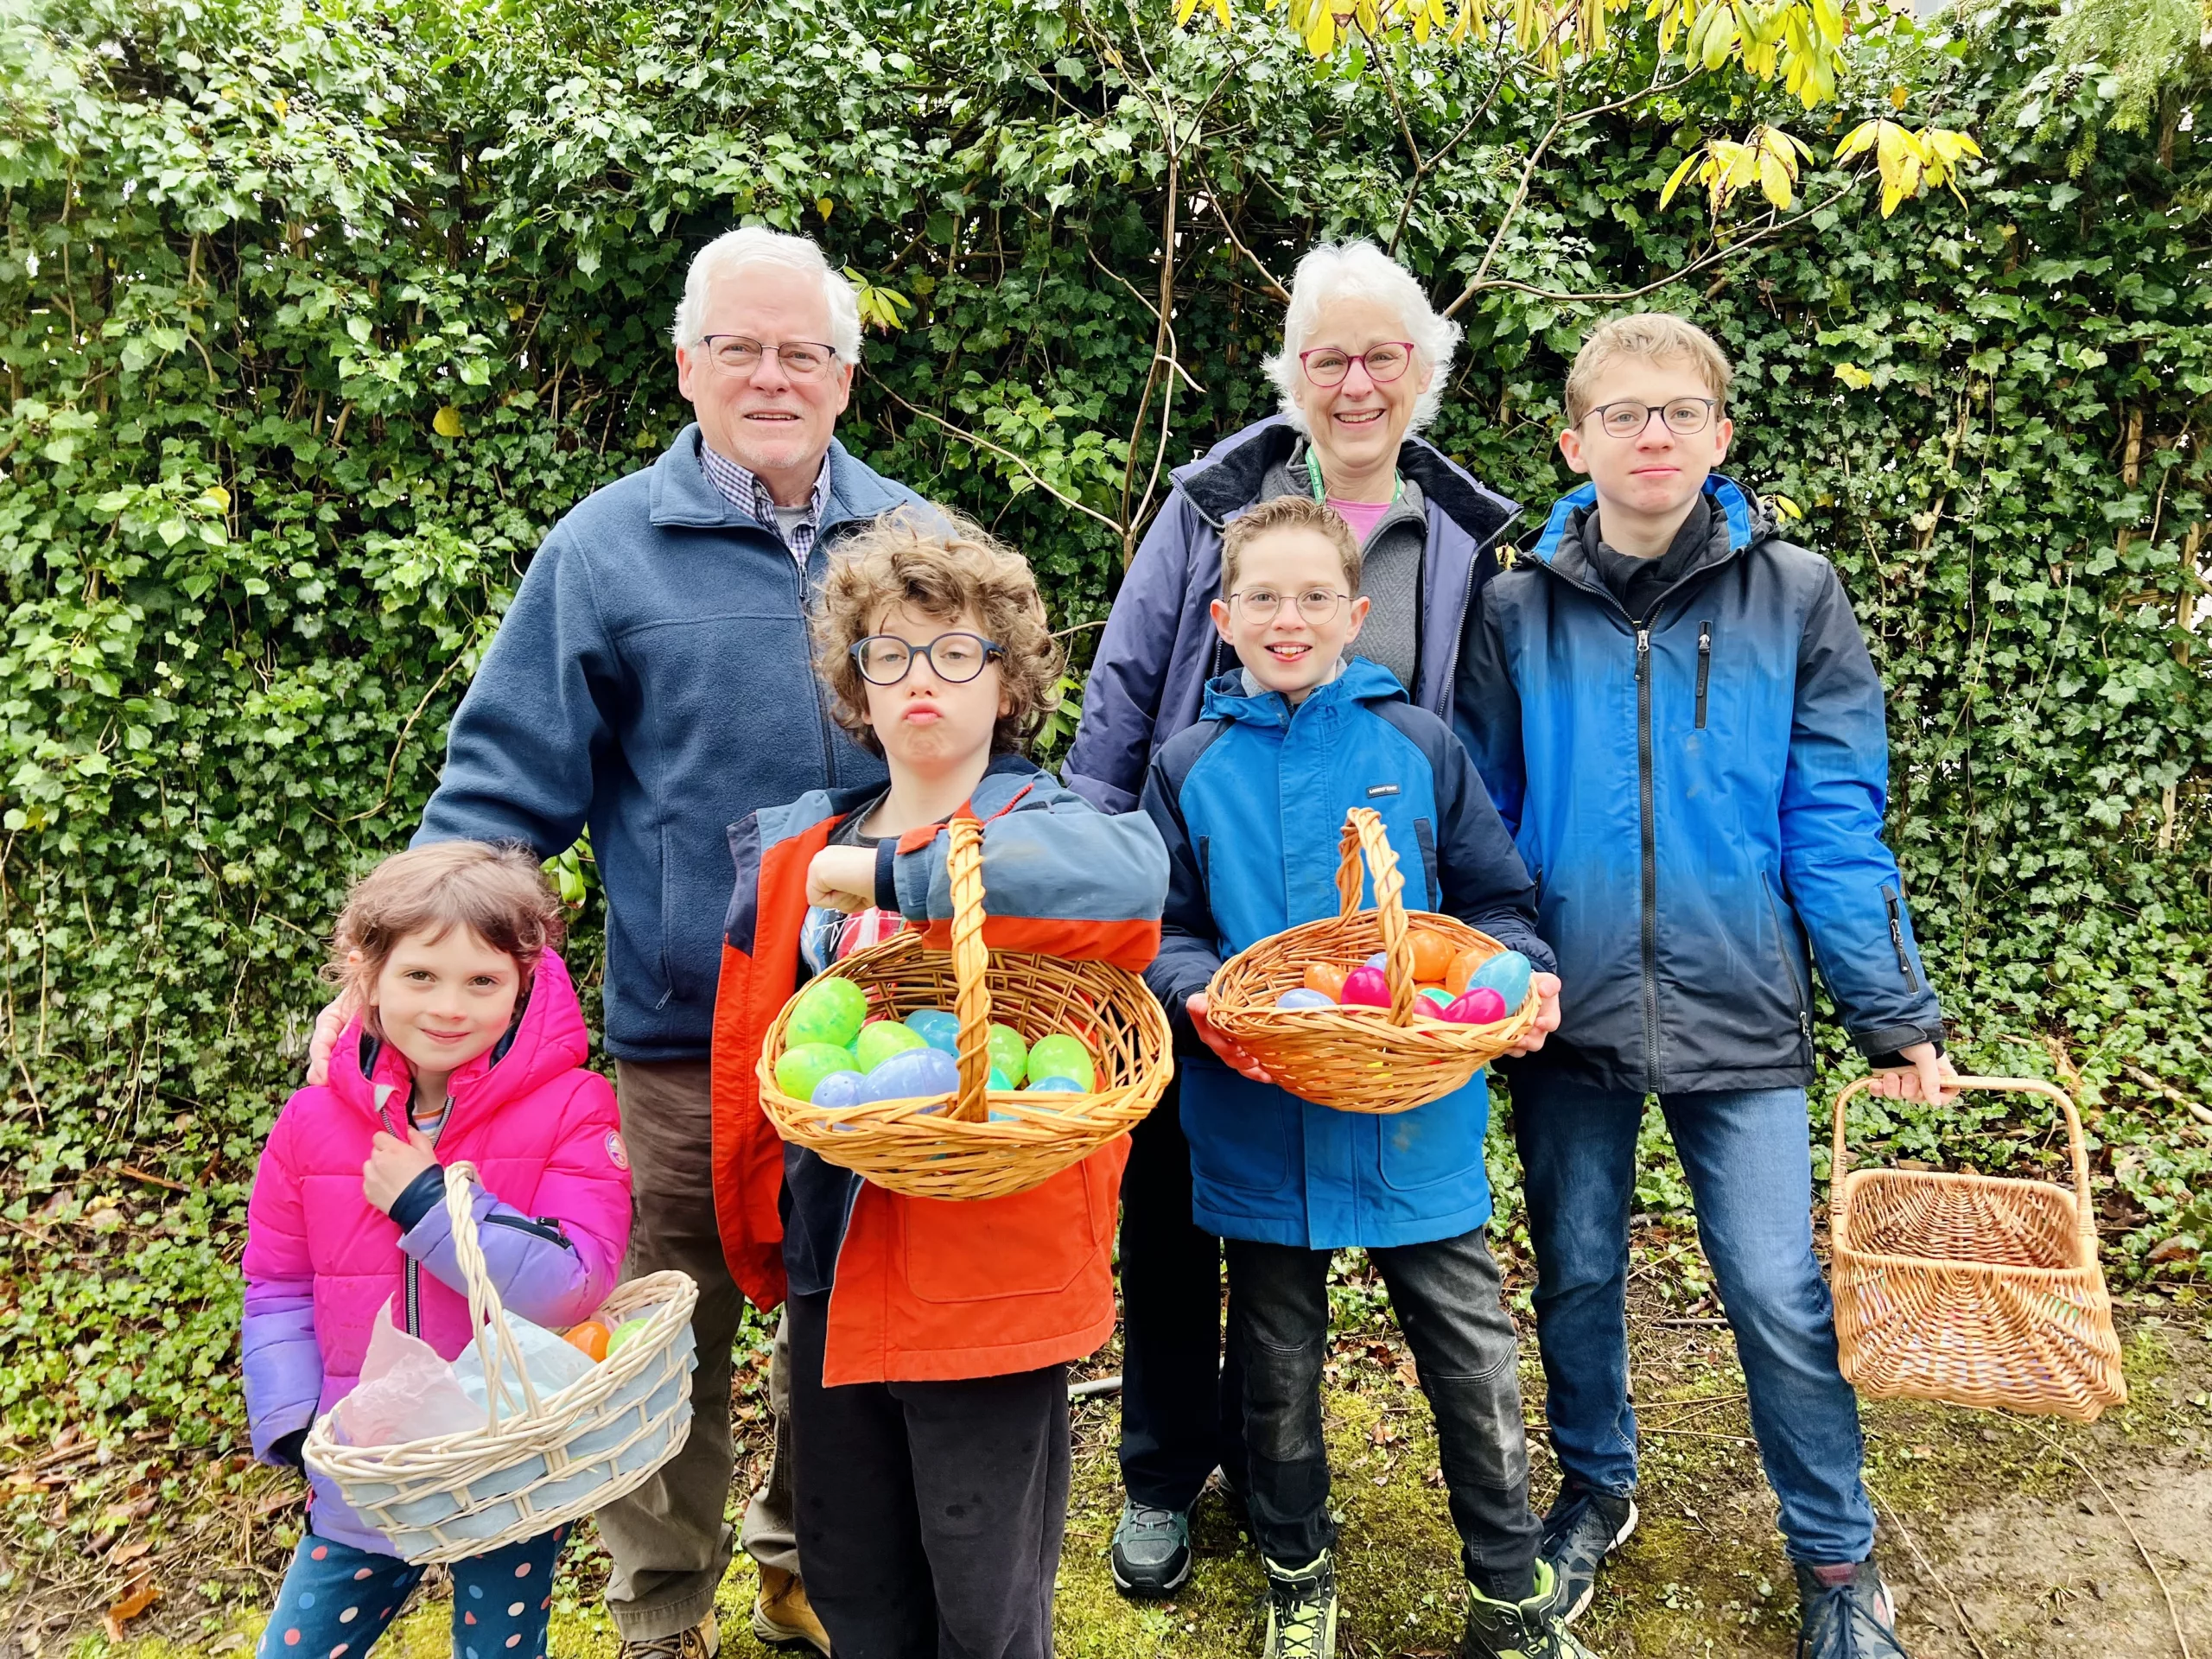 My Parents' First Visit to Germany - we got to celebrate Easter with them!